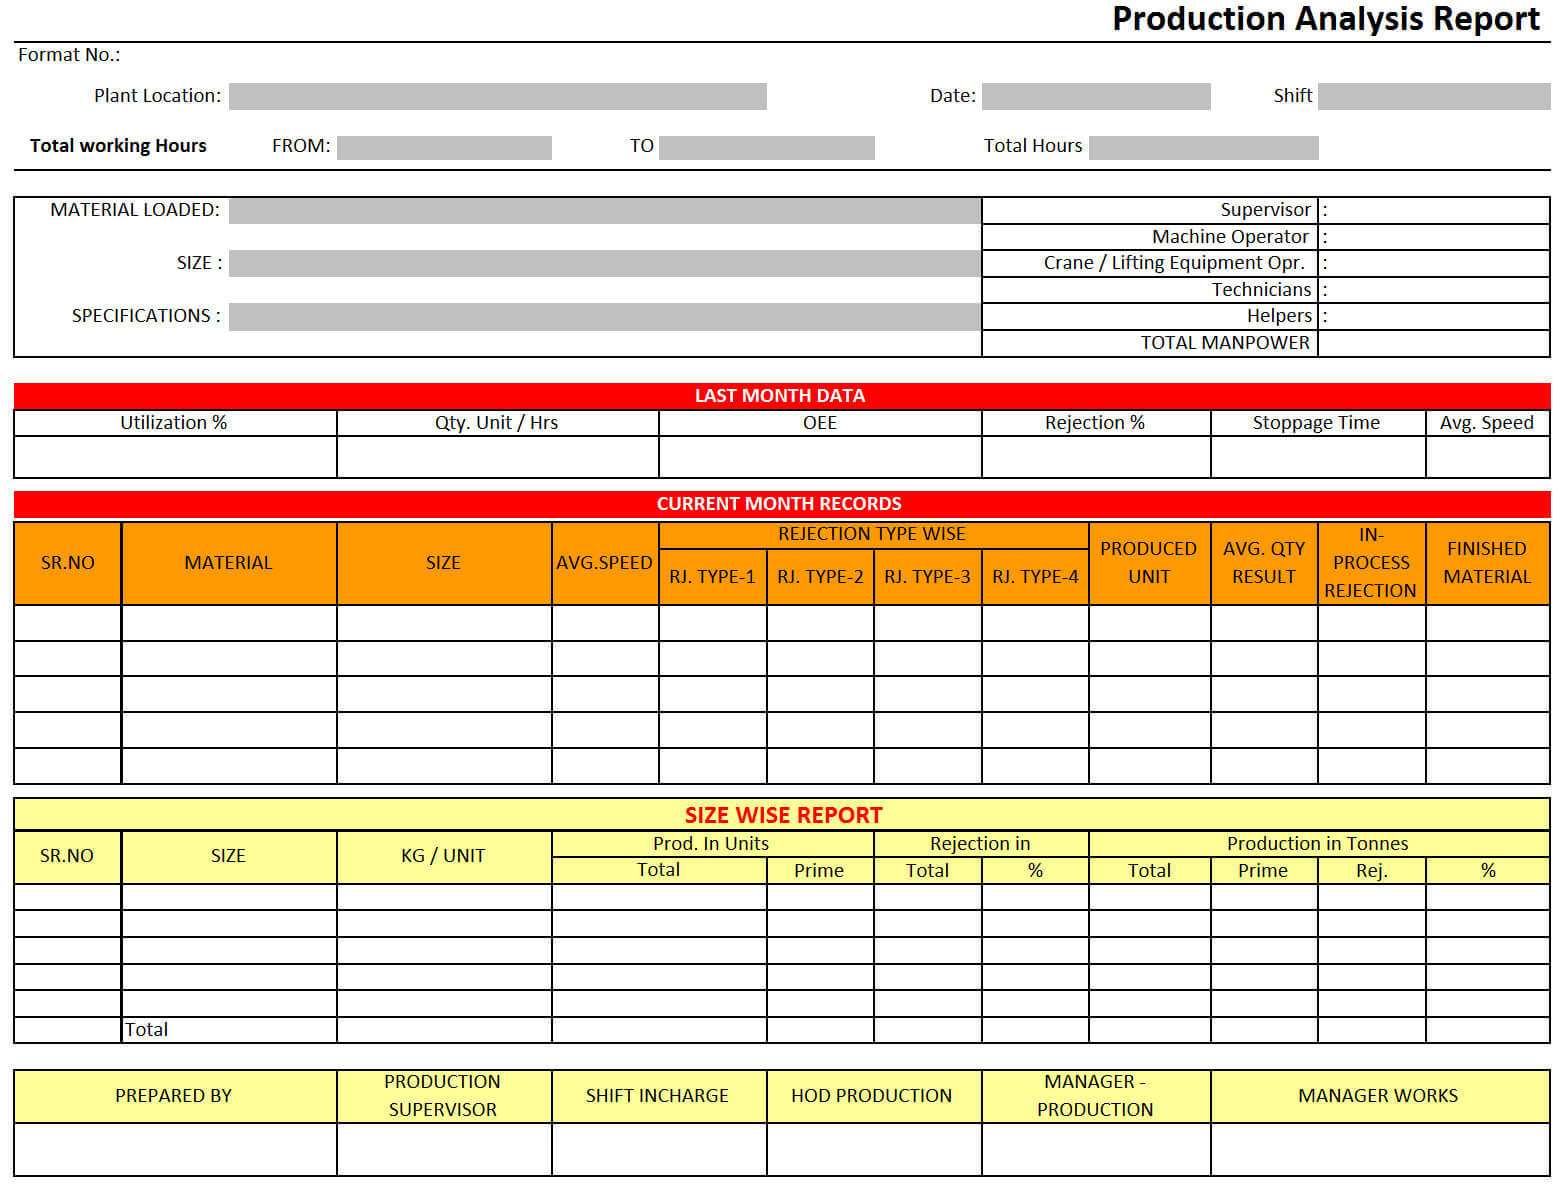 Production Analysis Report – With Company Analysis Report Template